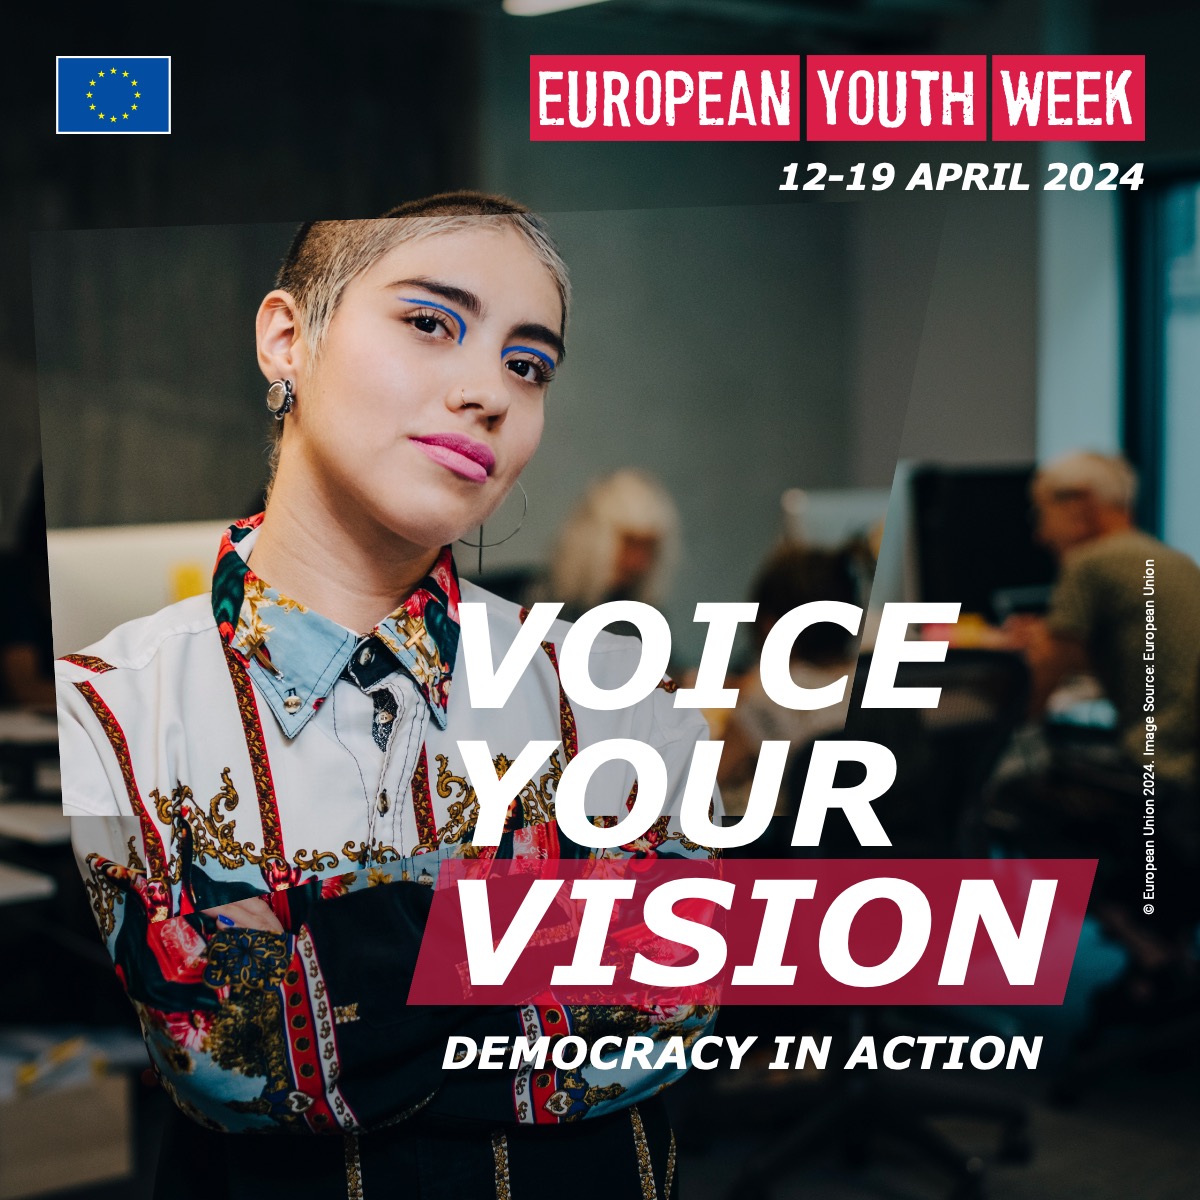 📢 Raise your voice for Europe's future! 🇪🇺 The Voice Platform by the European Commission is your space to share ideas, perspectives, and concerns. Shape the EU with your unique vision 👉 bit.ly/3VPLm1T #EUYouthWeek @EuropeanYouthEU